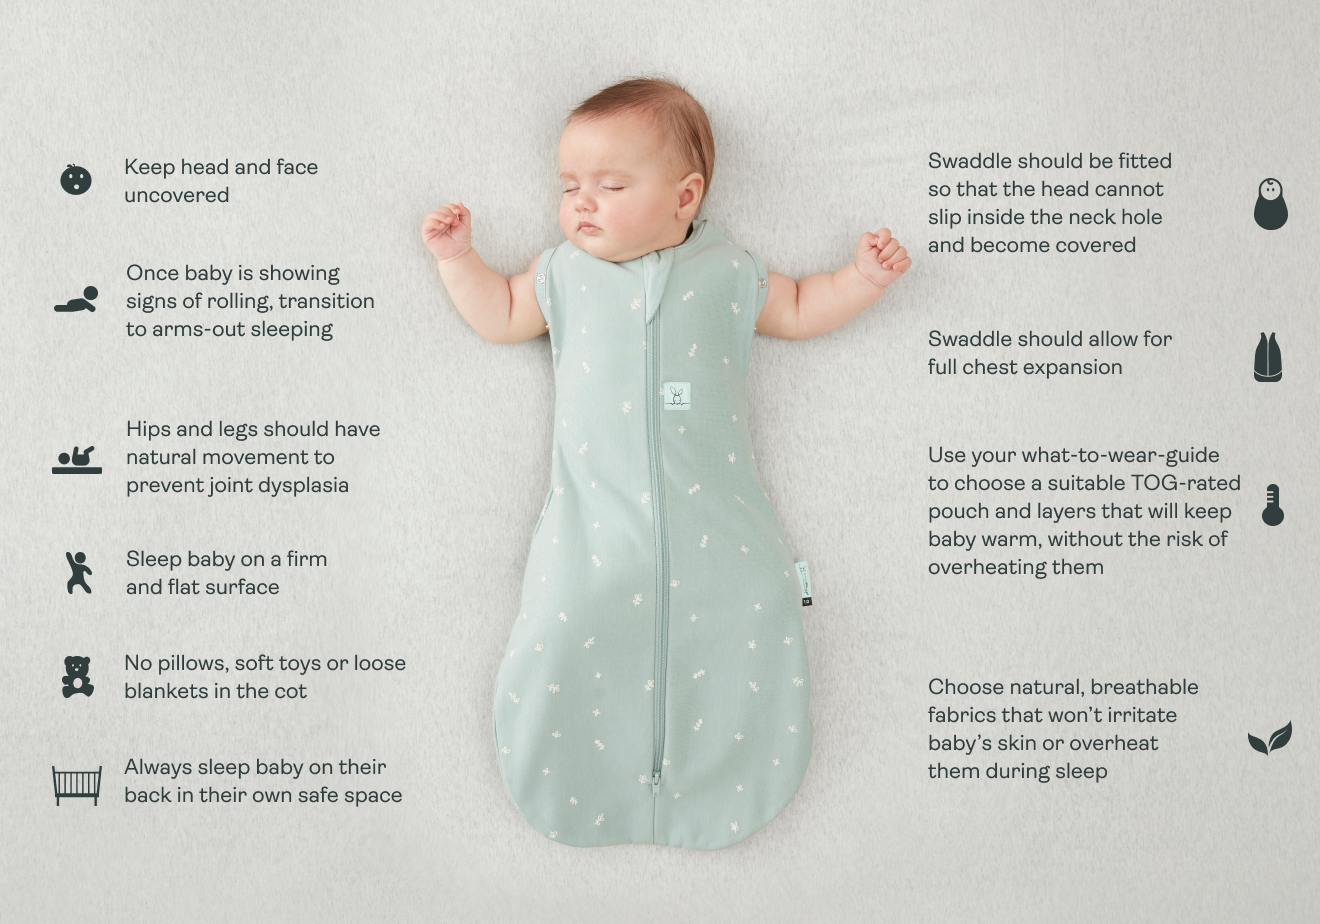 List of ergoPouch sleepwear features that promote safe sleep for babies